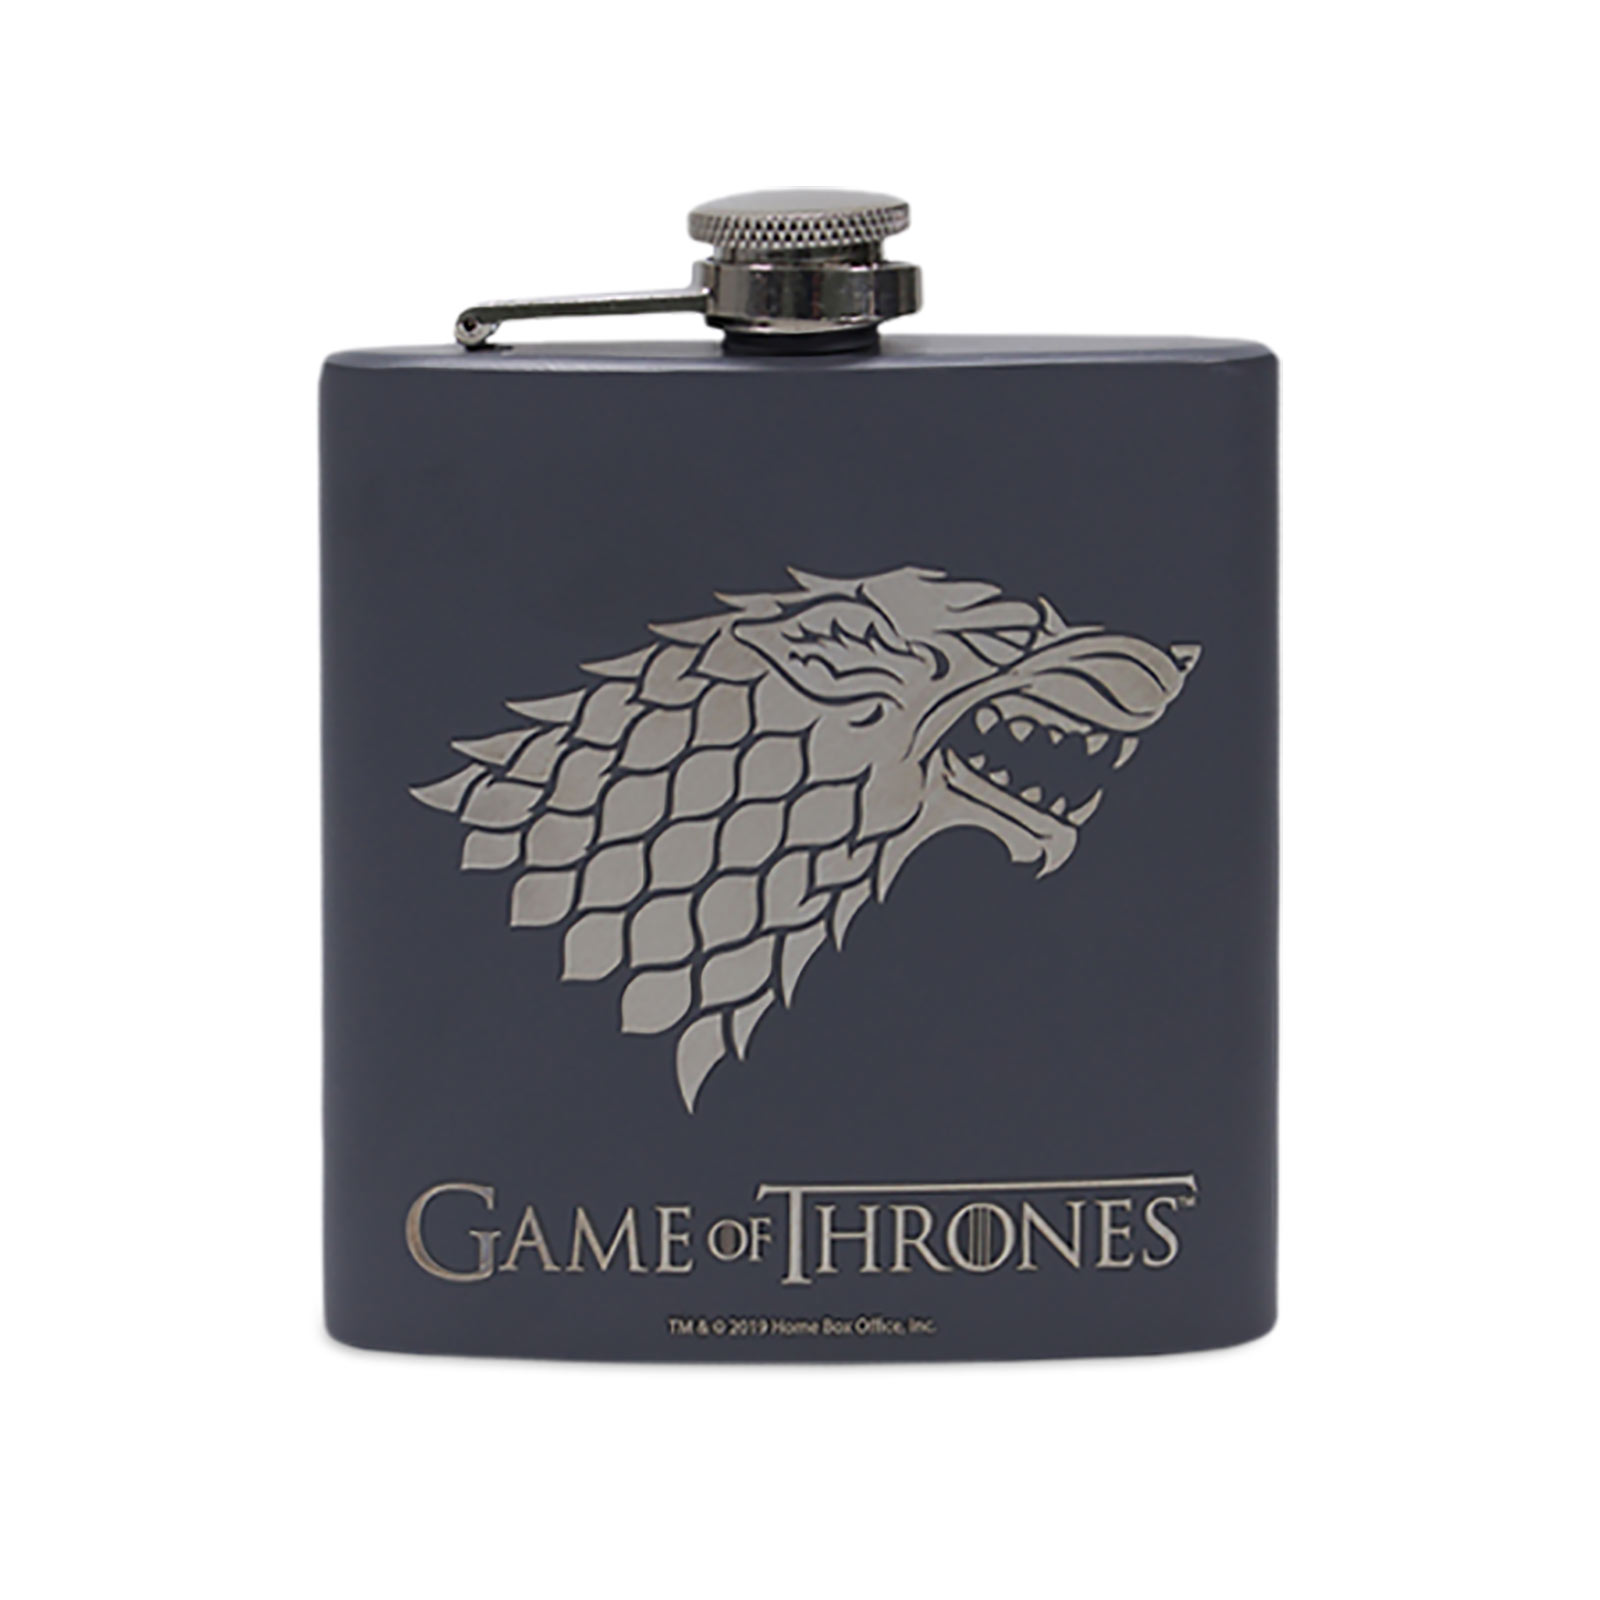 Game of Thrones - Strong Winter is Coming hip flask